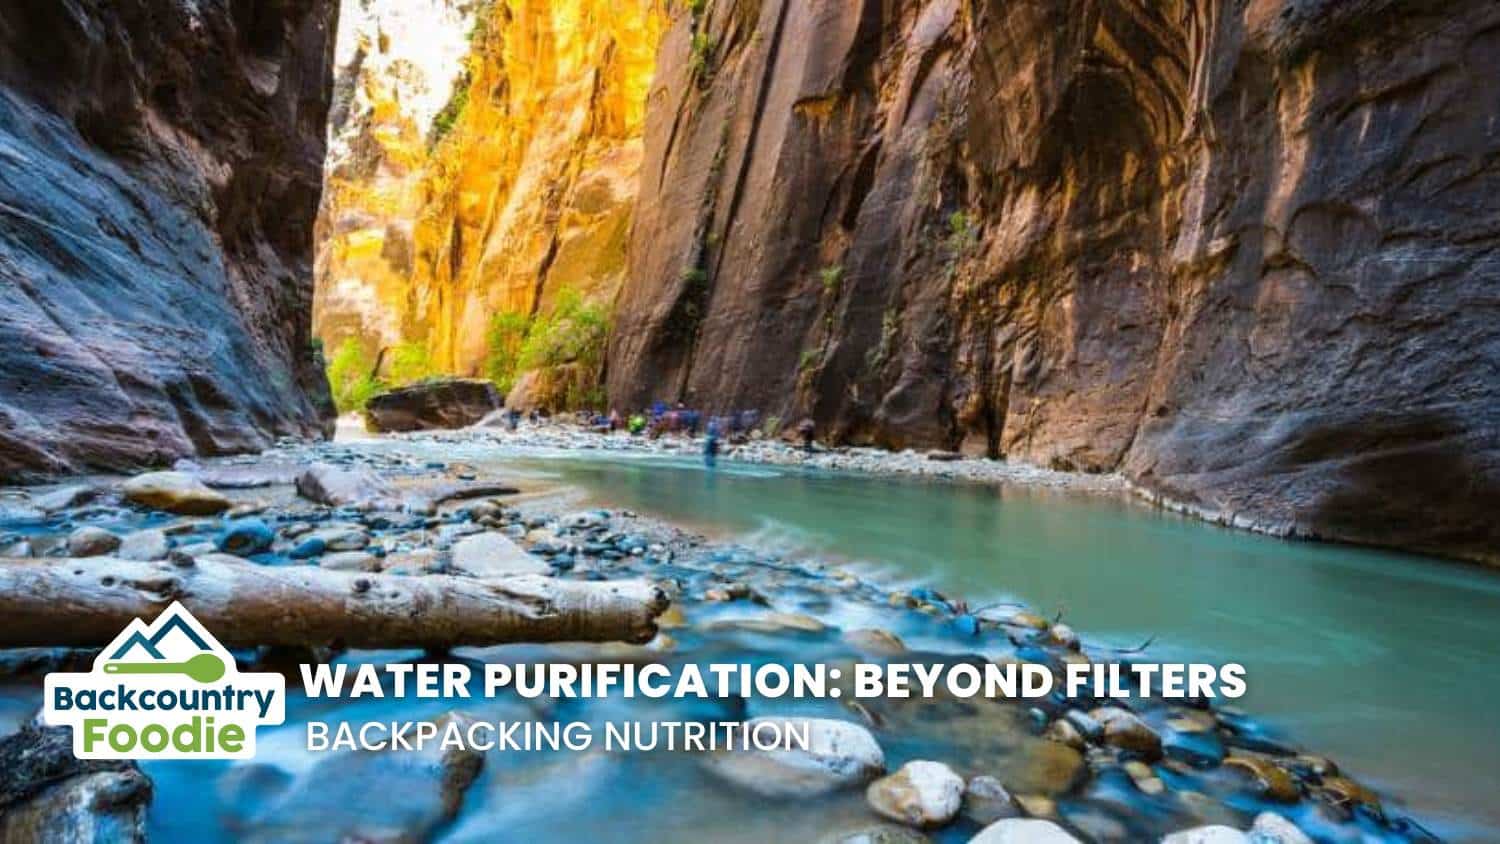 Backcountry Foodie Backpacking Water Purification blog thumbnail image